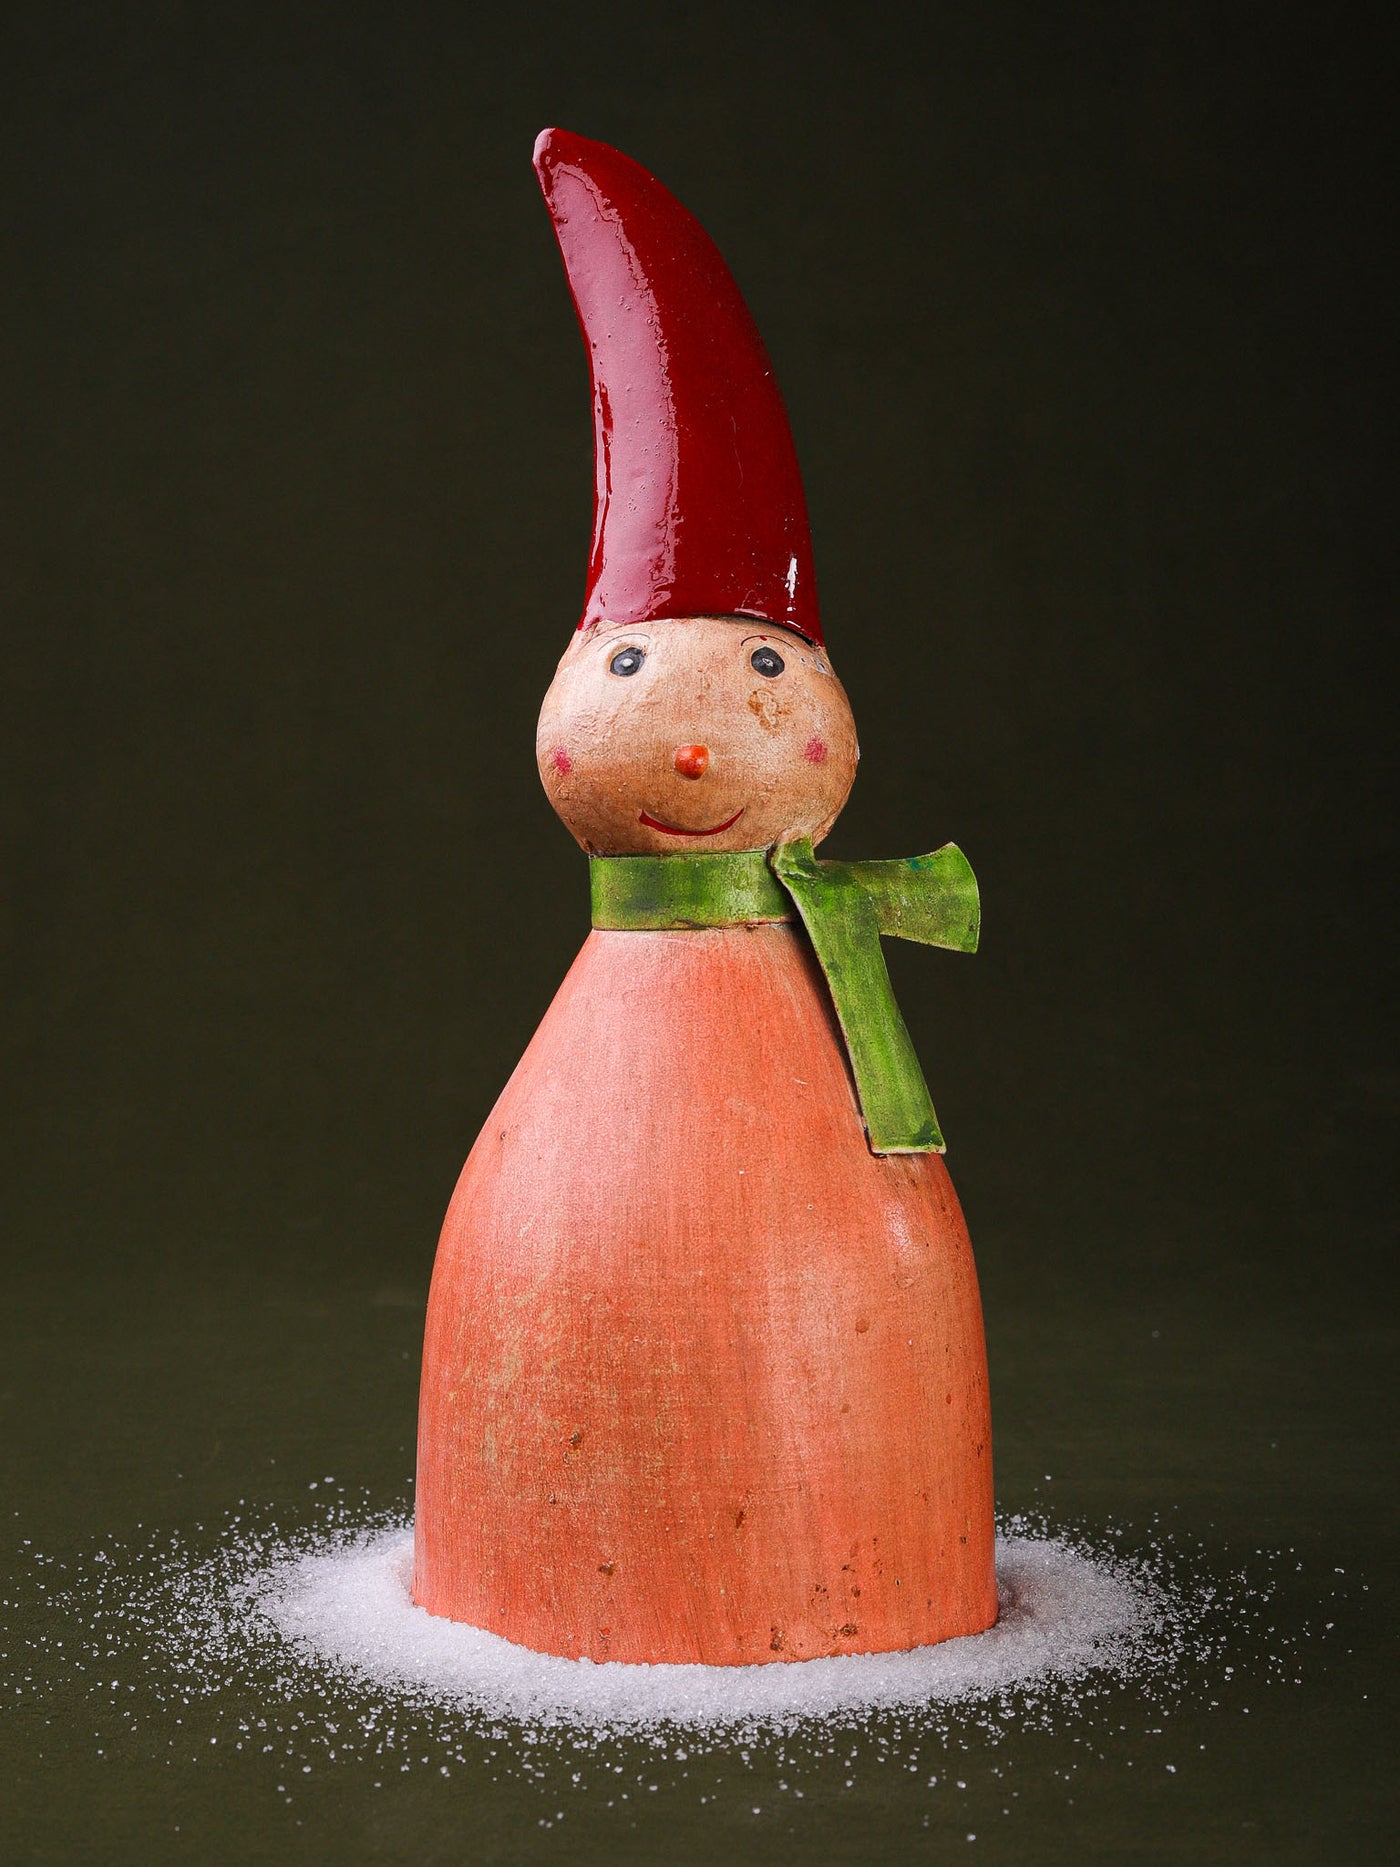 Red-Hatted Snowman Figurine